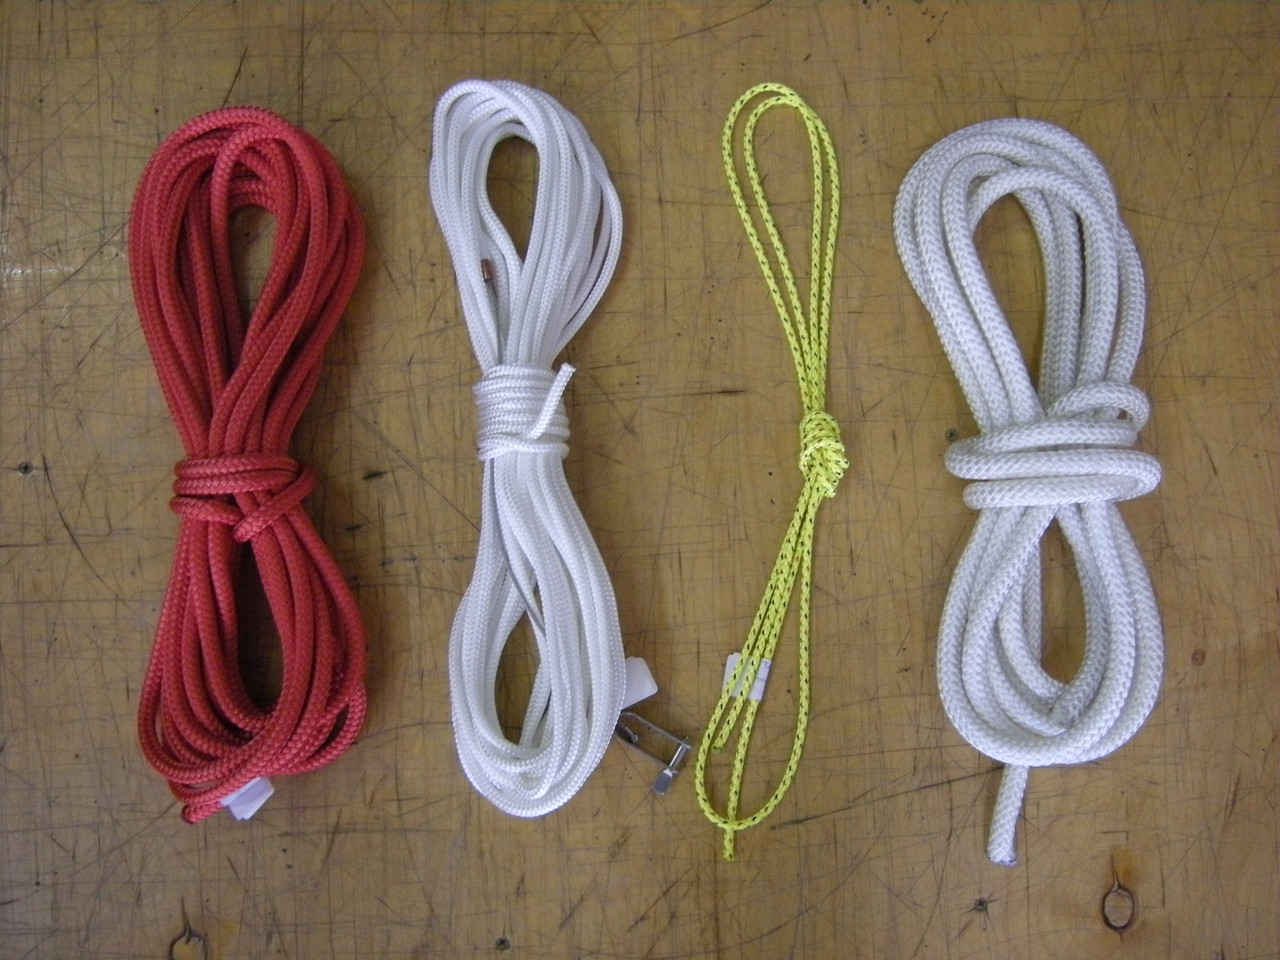 Line kit to fit Hobie® Wave Classic or Club - made of quality rope from Marlow, Samson, and / or Bainbridge. 